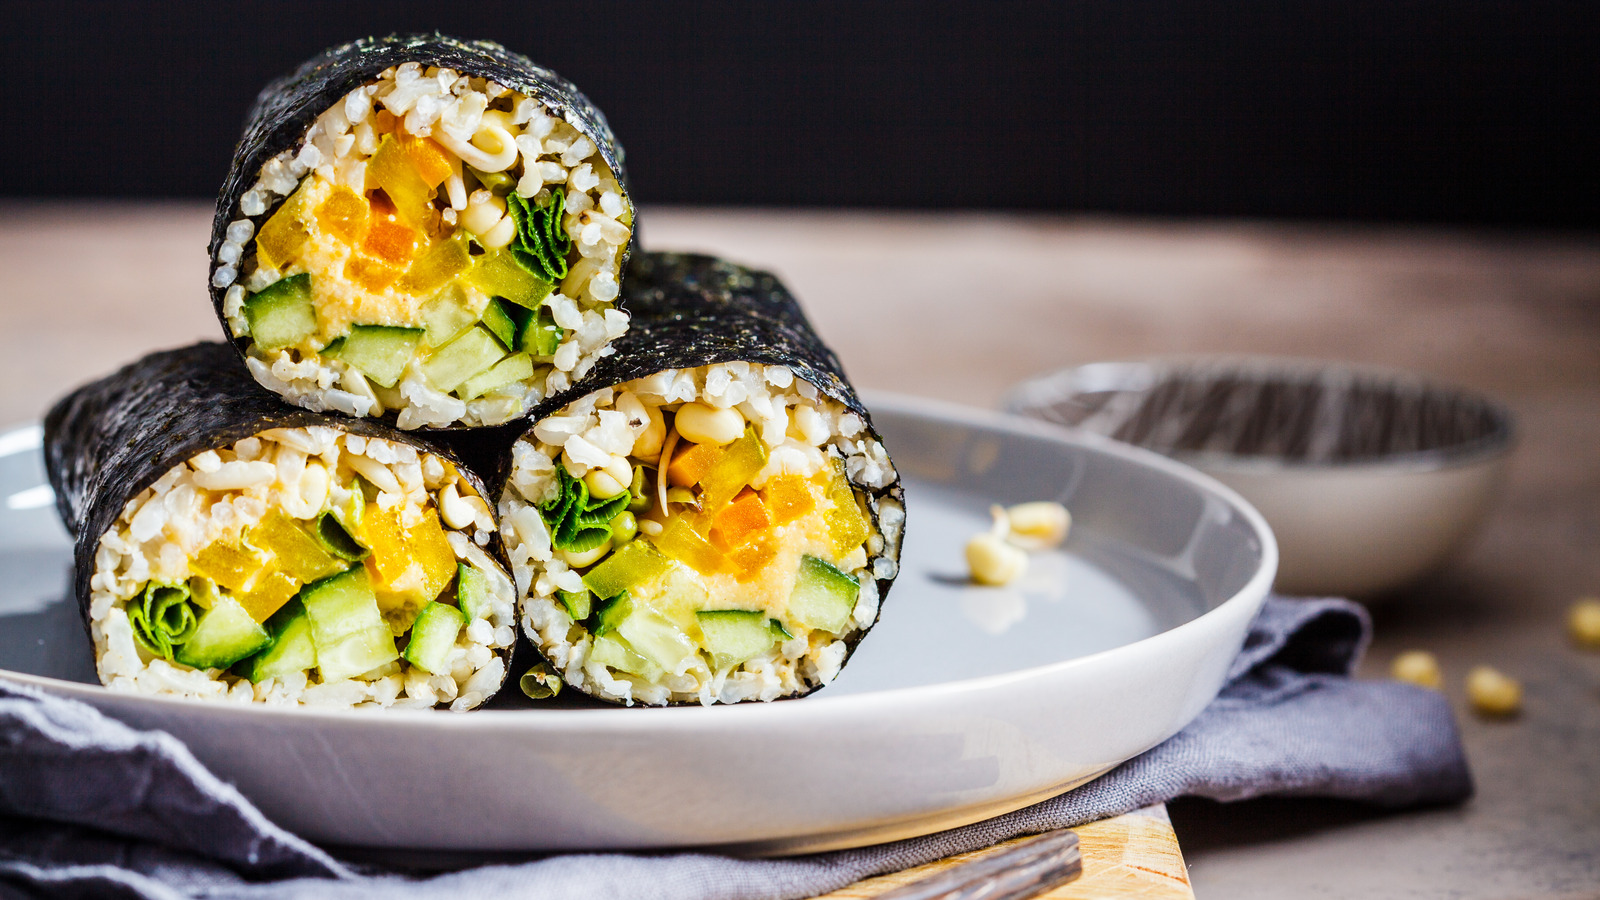 How to make Vegetarian sushi at home with cooked rice​